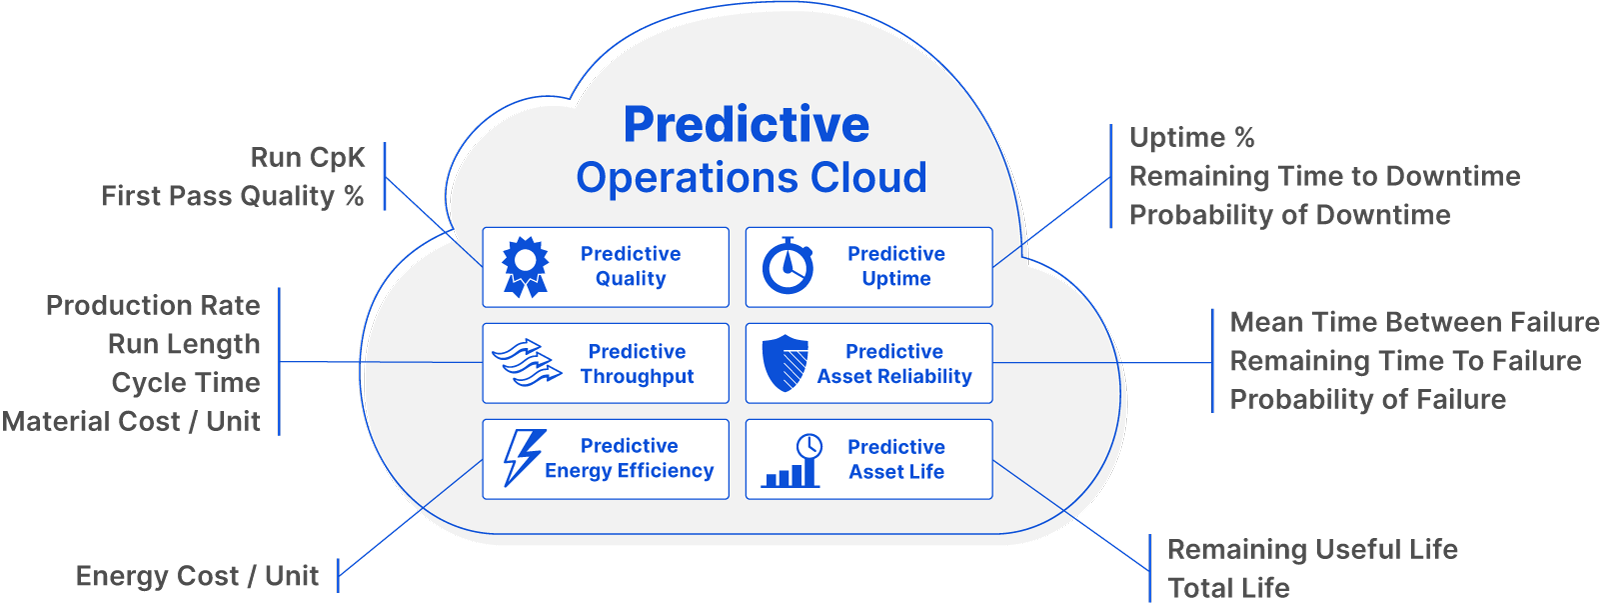 Predictive applications such as Predictive Quality, Predictive Uptime, Predictive Throughput, Predictive Asset Reliability, Predictive Energy Efficiency, and Predictive Asset Life allow you to solve for a variety of factory-based metrics. These include, but are not limited to, first pass quality percent, uptime percent, material cost per unit, mean time between failure, energy cost per unit, and remaining useful life.